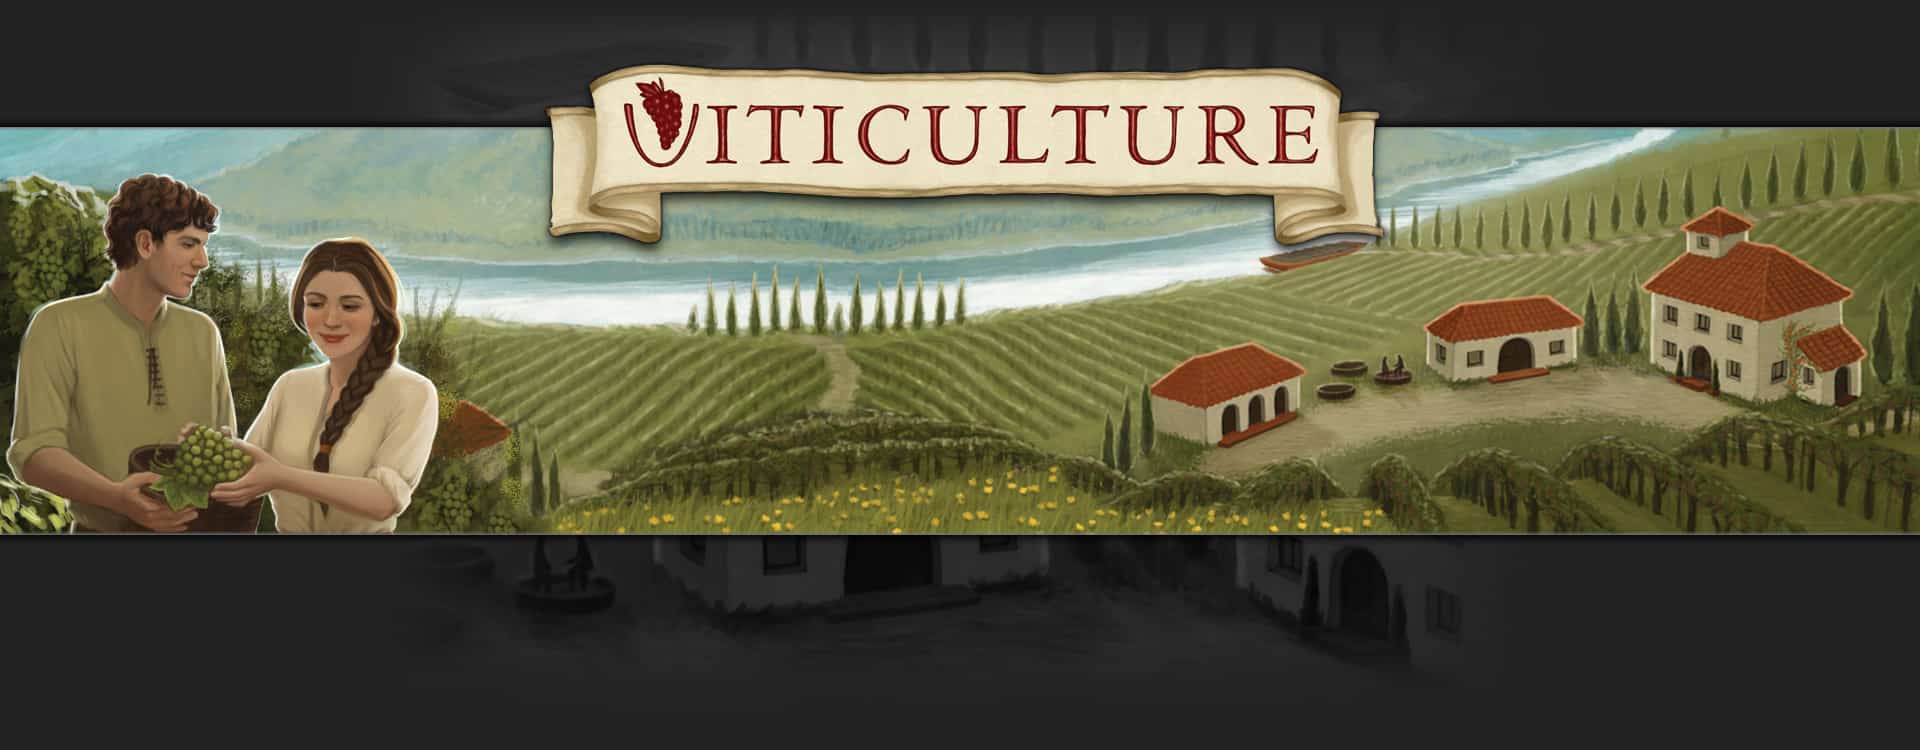 Viticulture by Jamey Stegmaier & Alan Stone